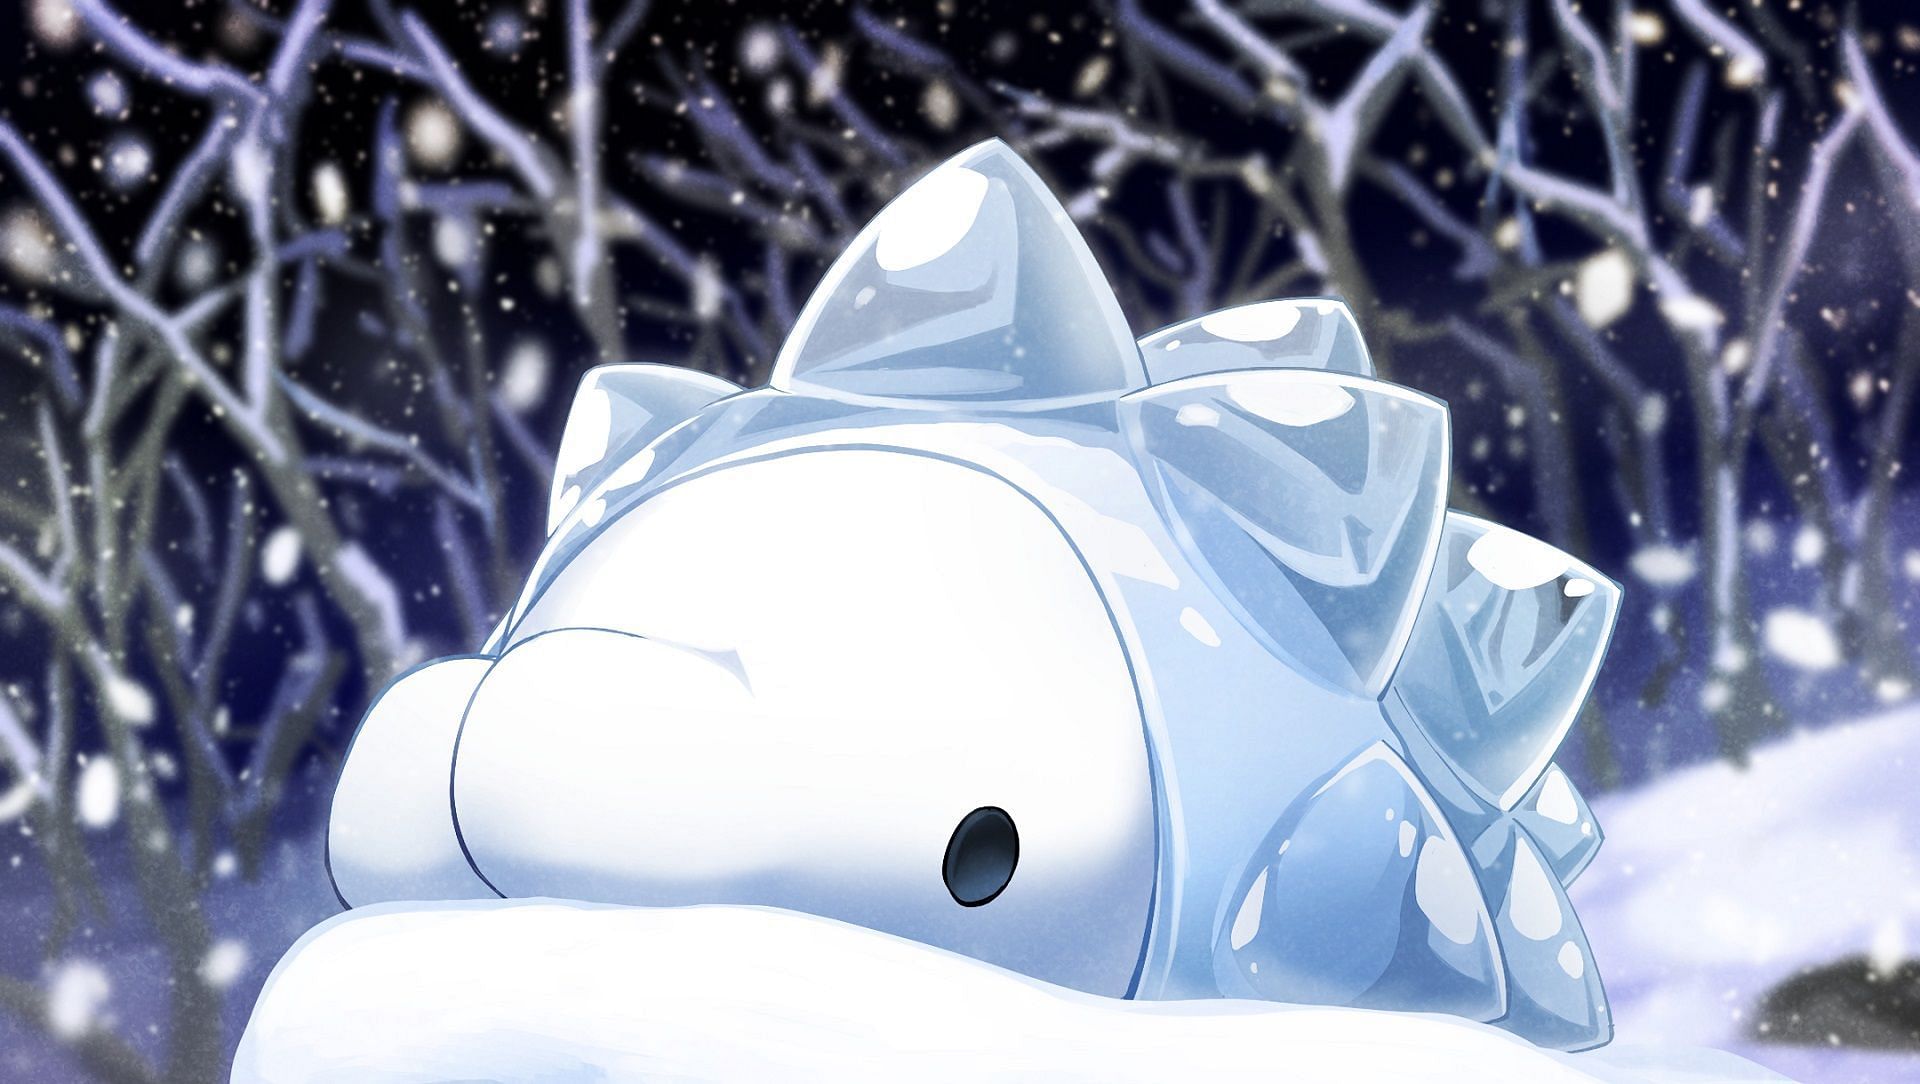 Snom as it appears in the trading card game (Image via The Pokemon Company)